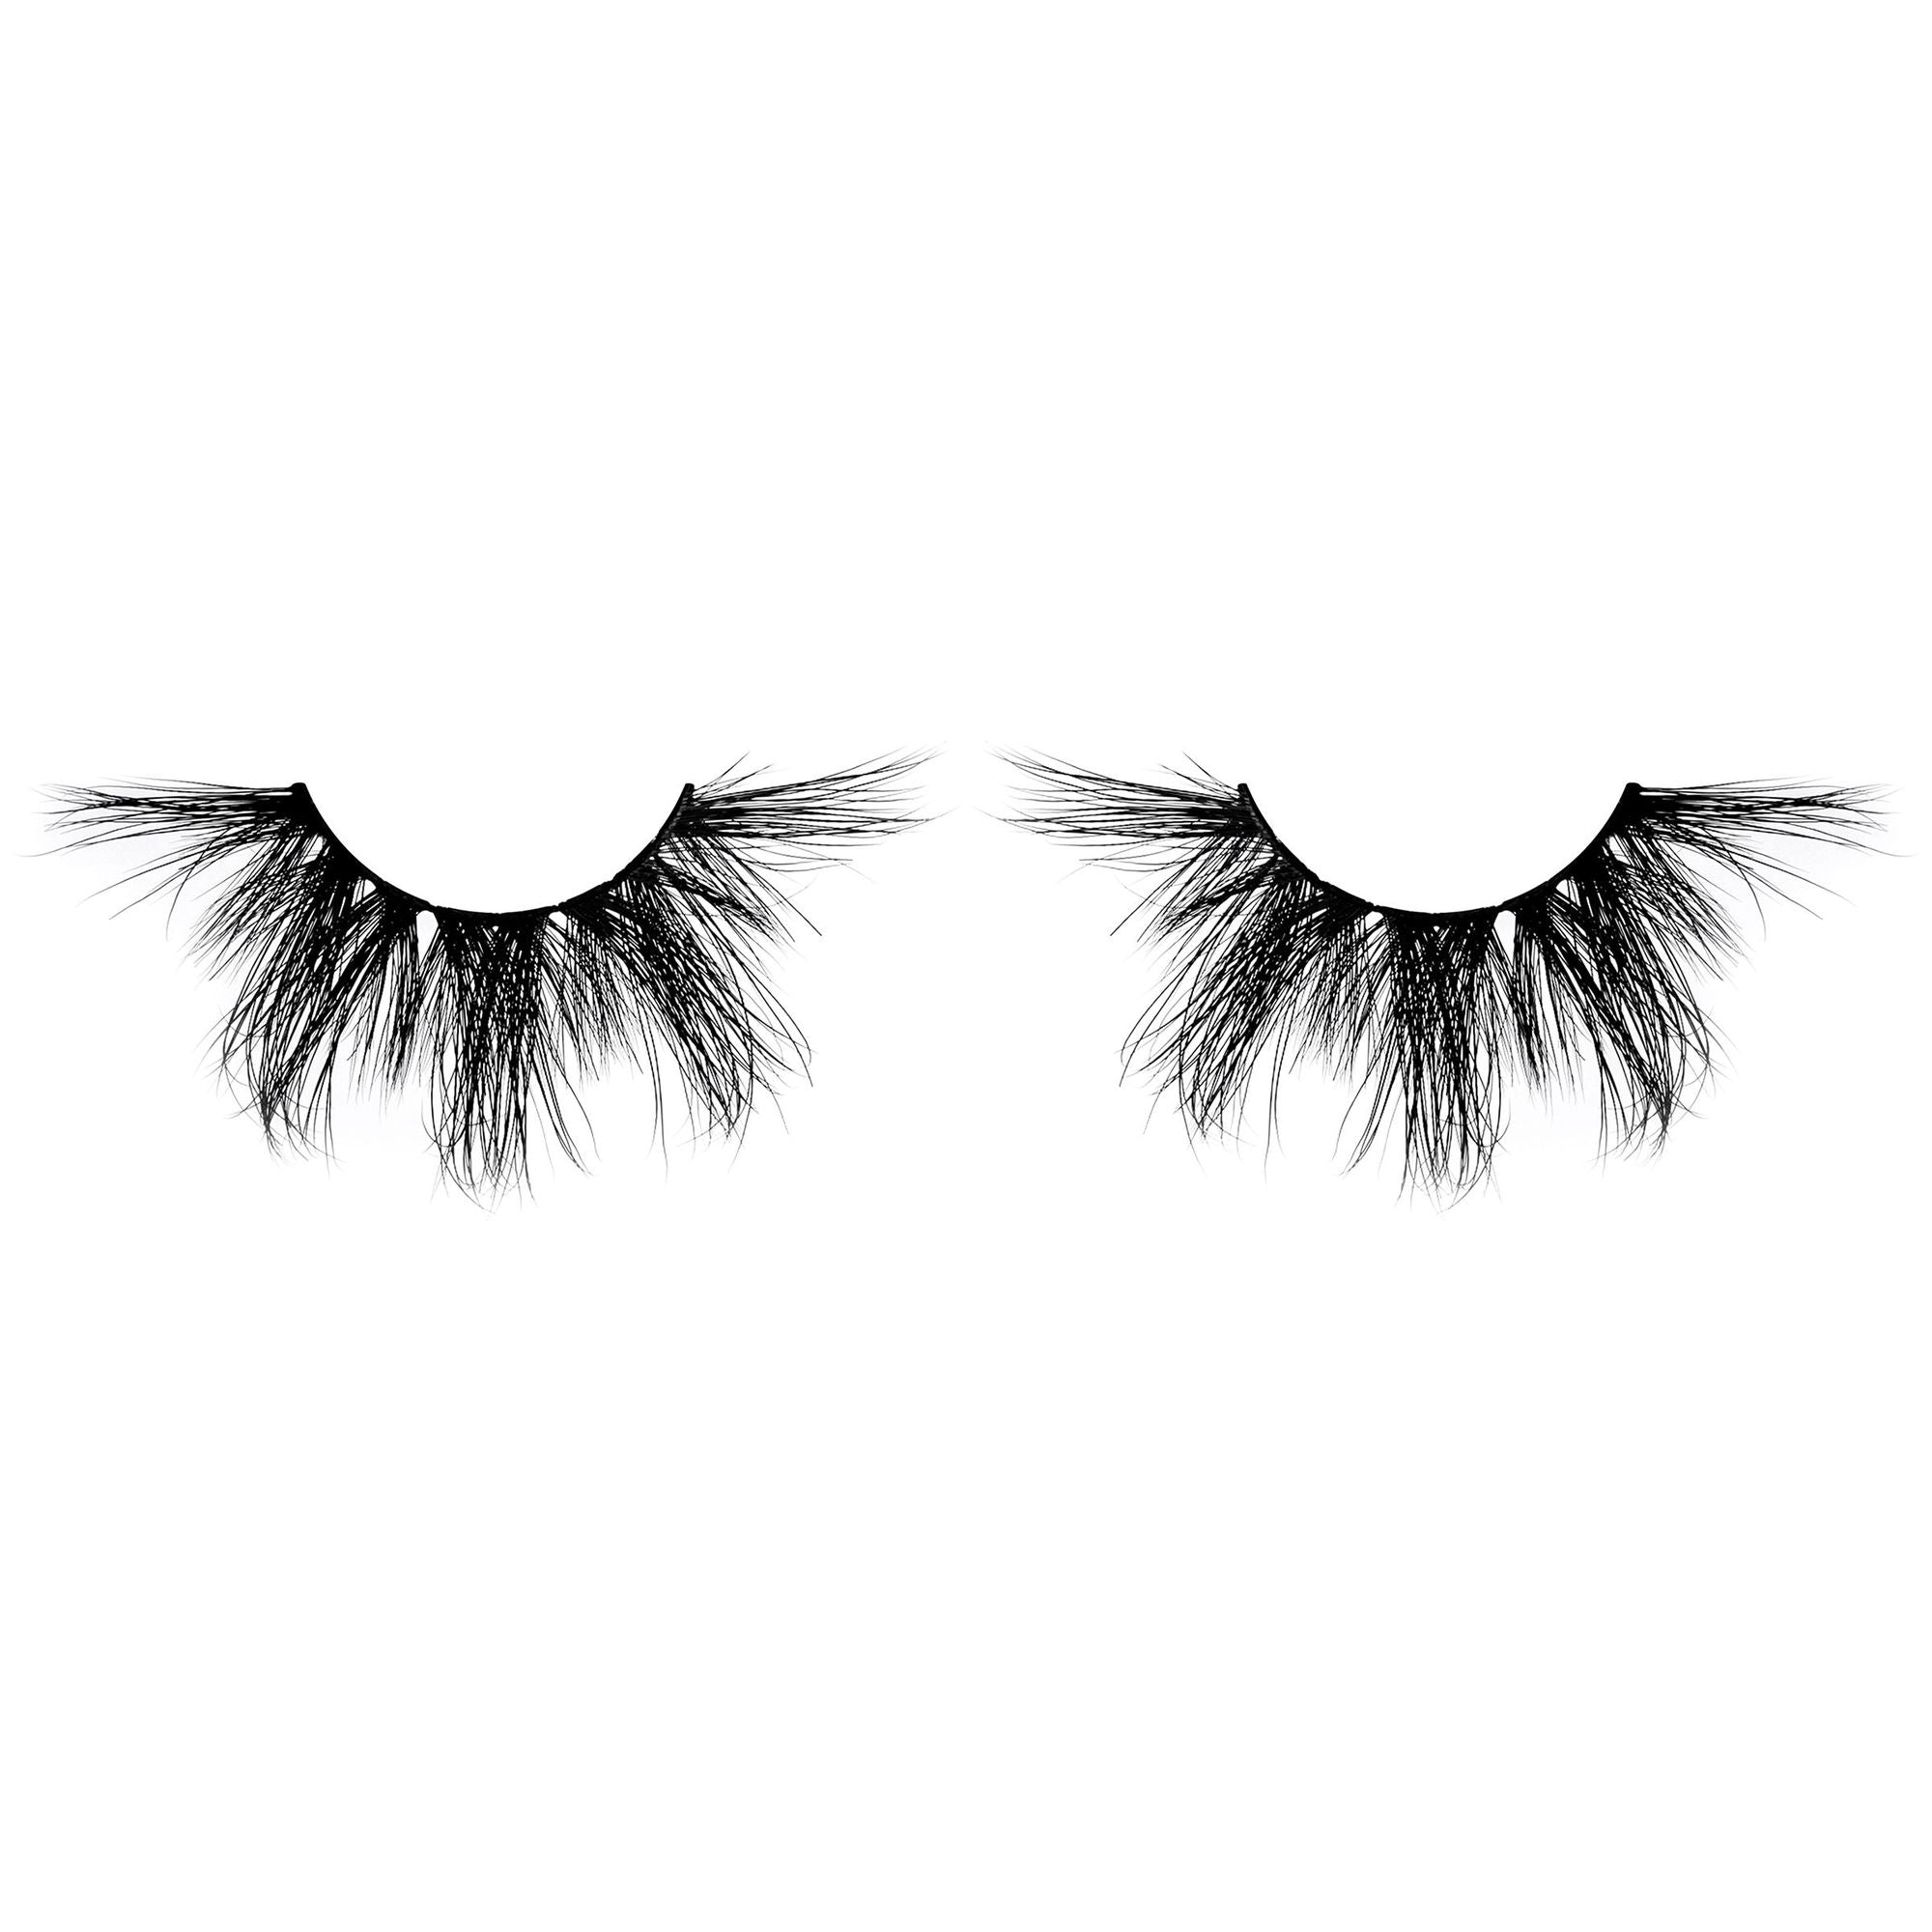 Glamour Us_Beauty Creations_Lashes_ALL FOR SHOW 35 MM Faux Mink Lashes__BC-35MMFL-AFS